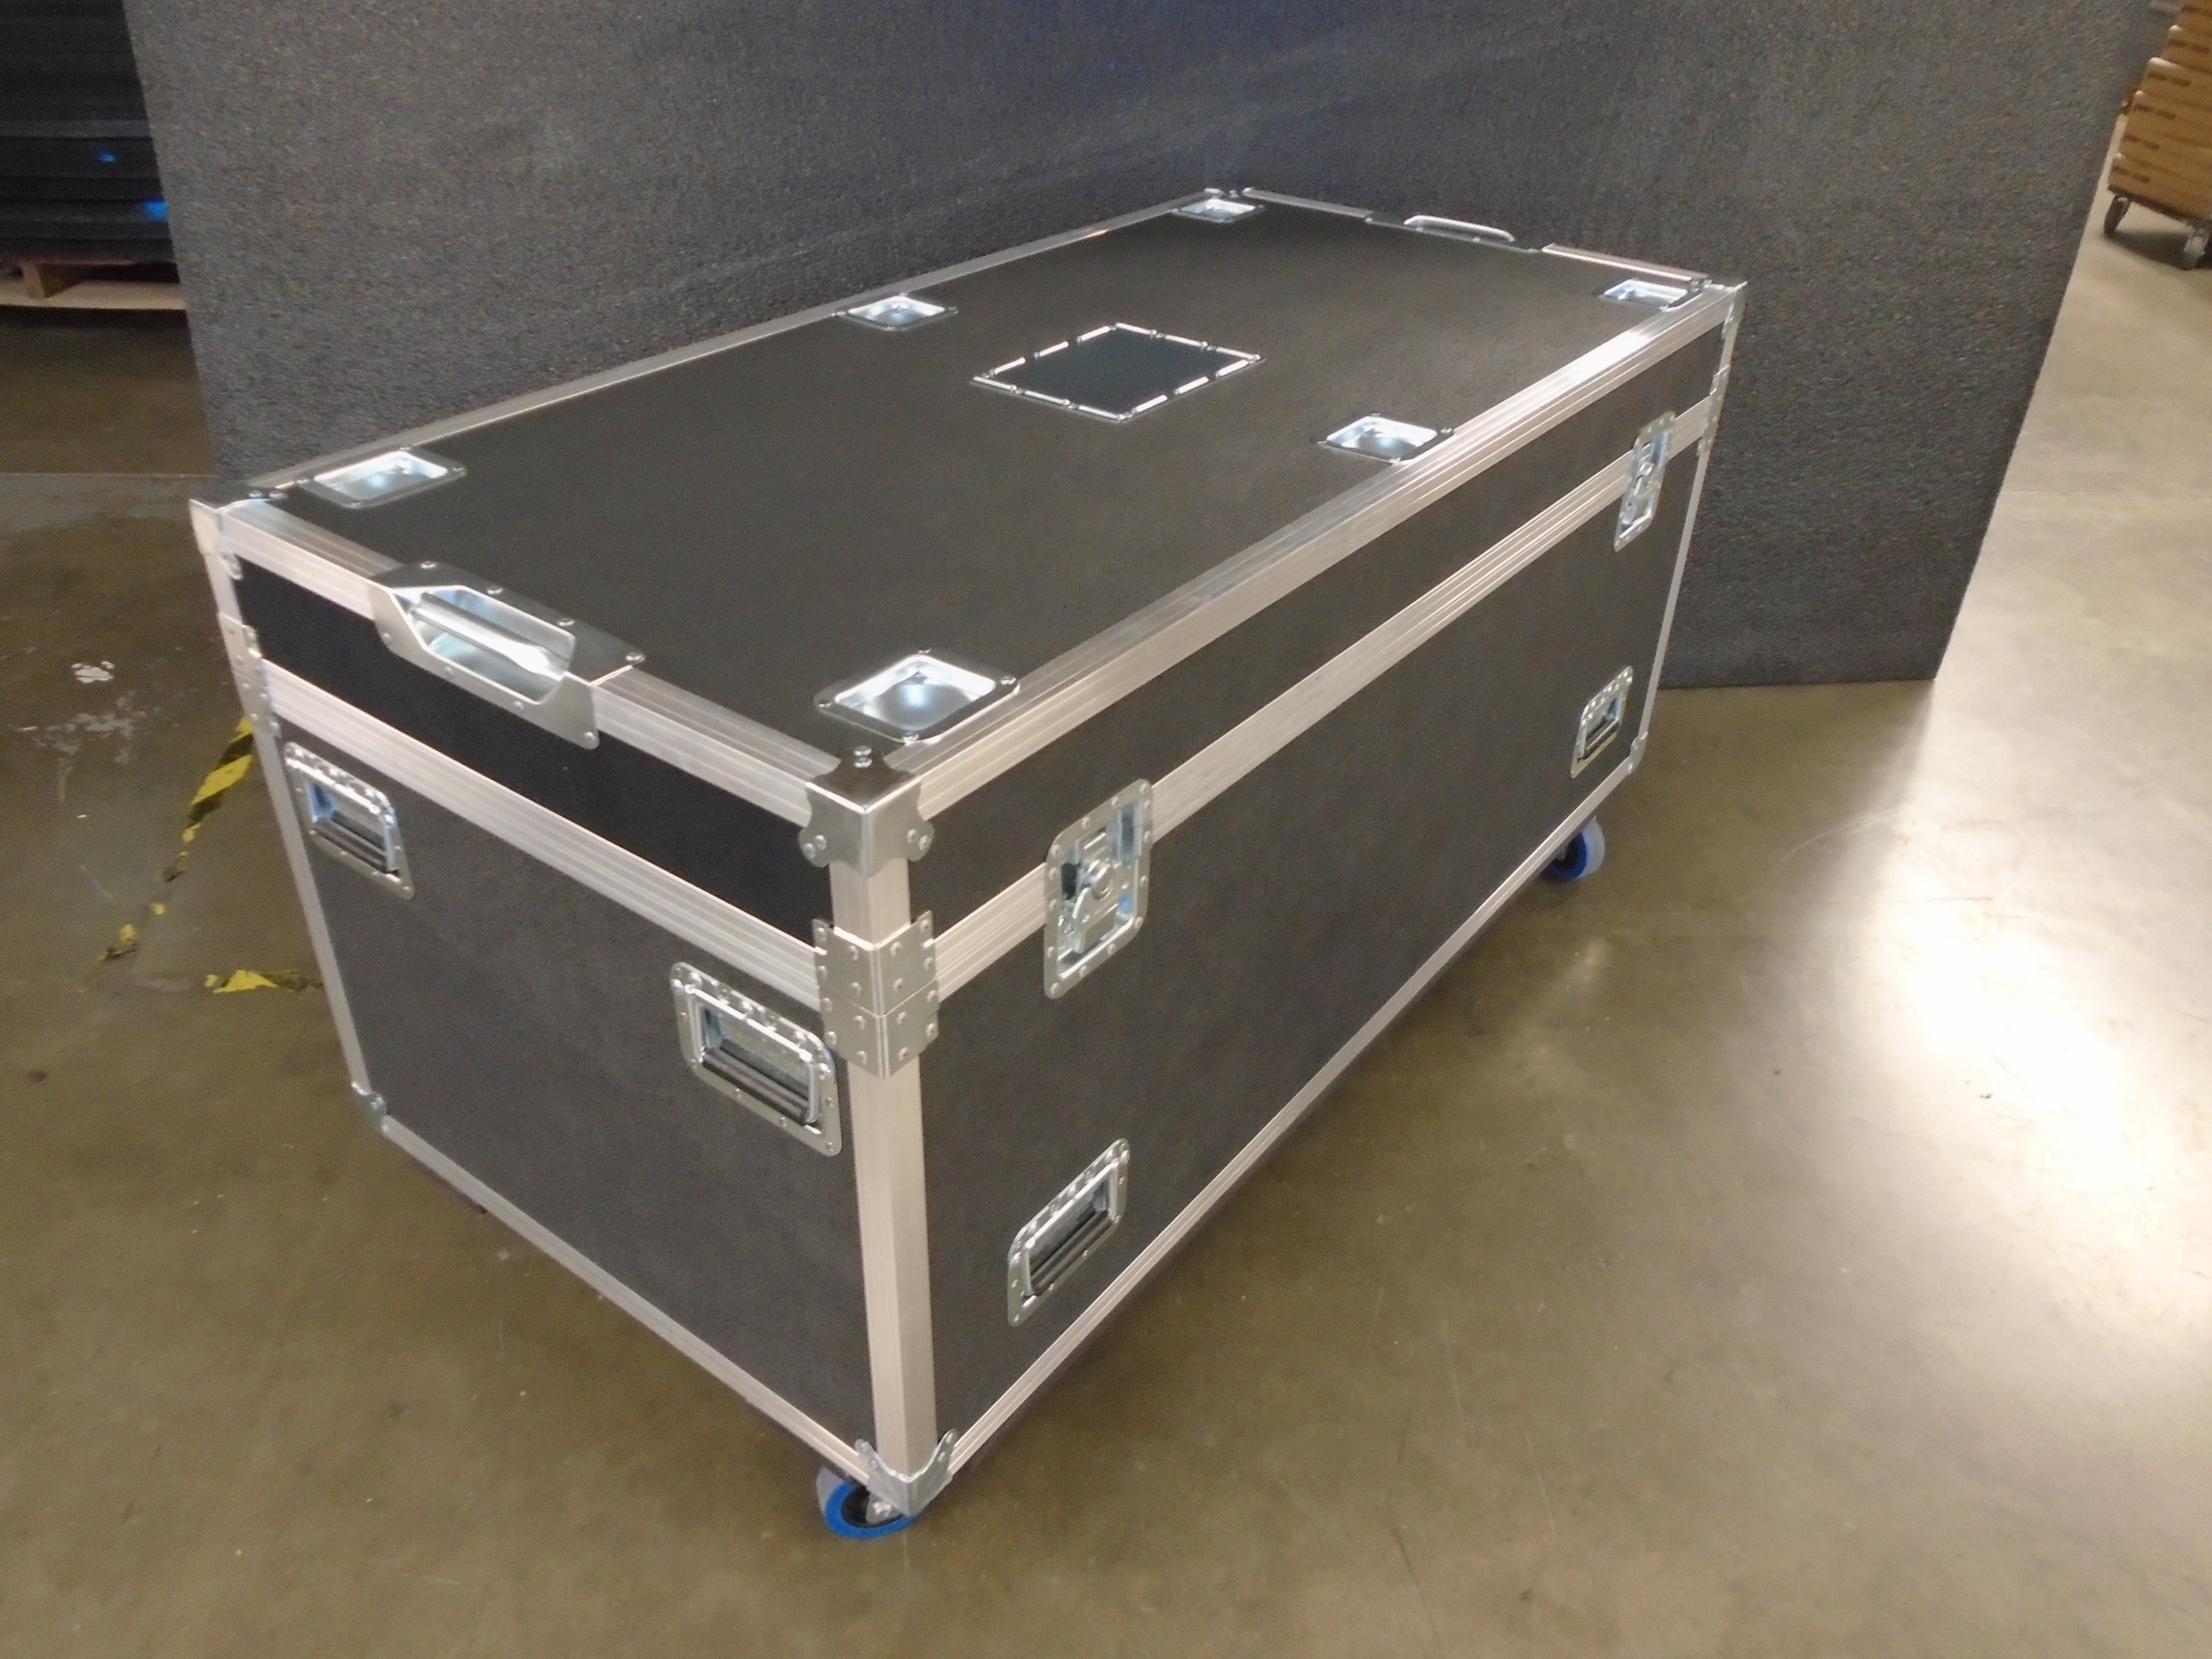 Print # 9112 - Custom Road Case for 6-Pack Chauvet Maverick Storm 1 Wash Moving Head Lighting Kit with Clamps Attached
 By Nelson Case Corp